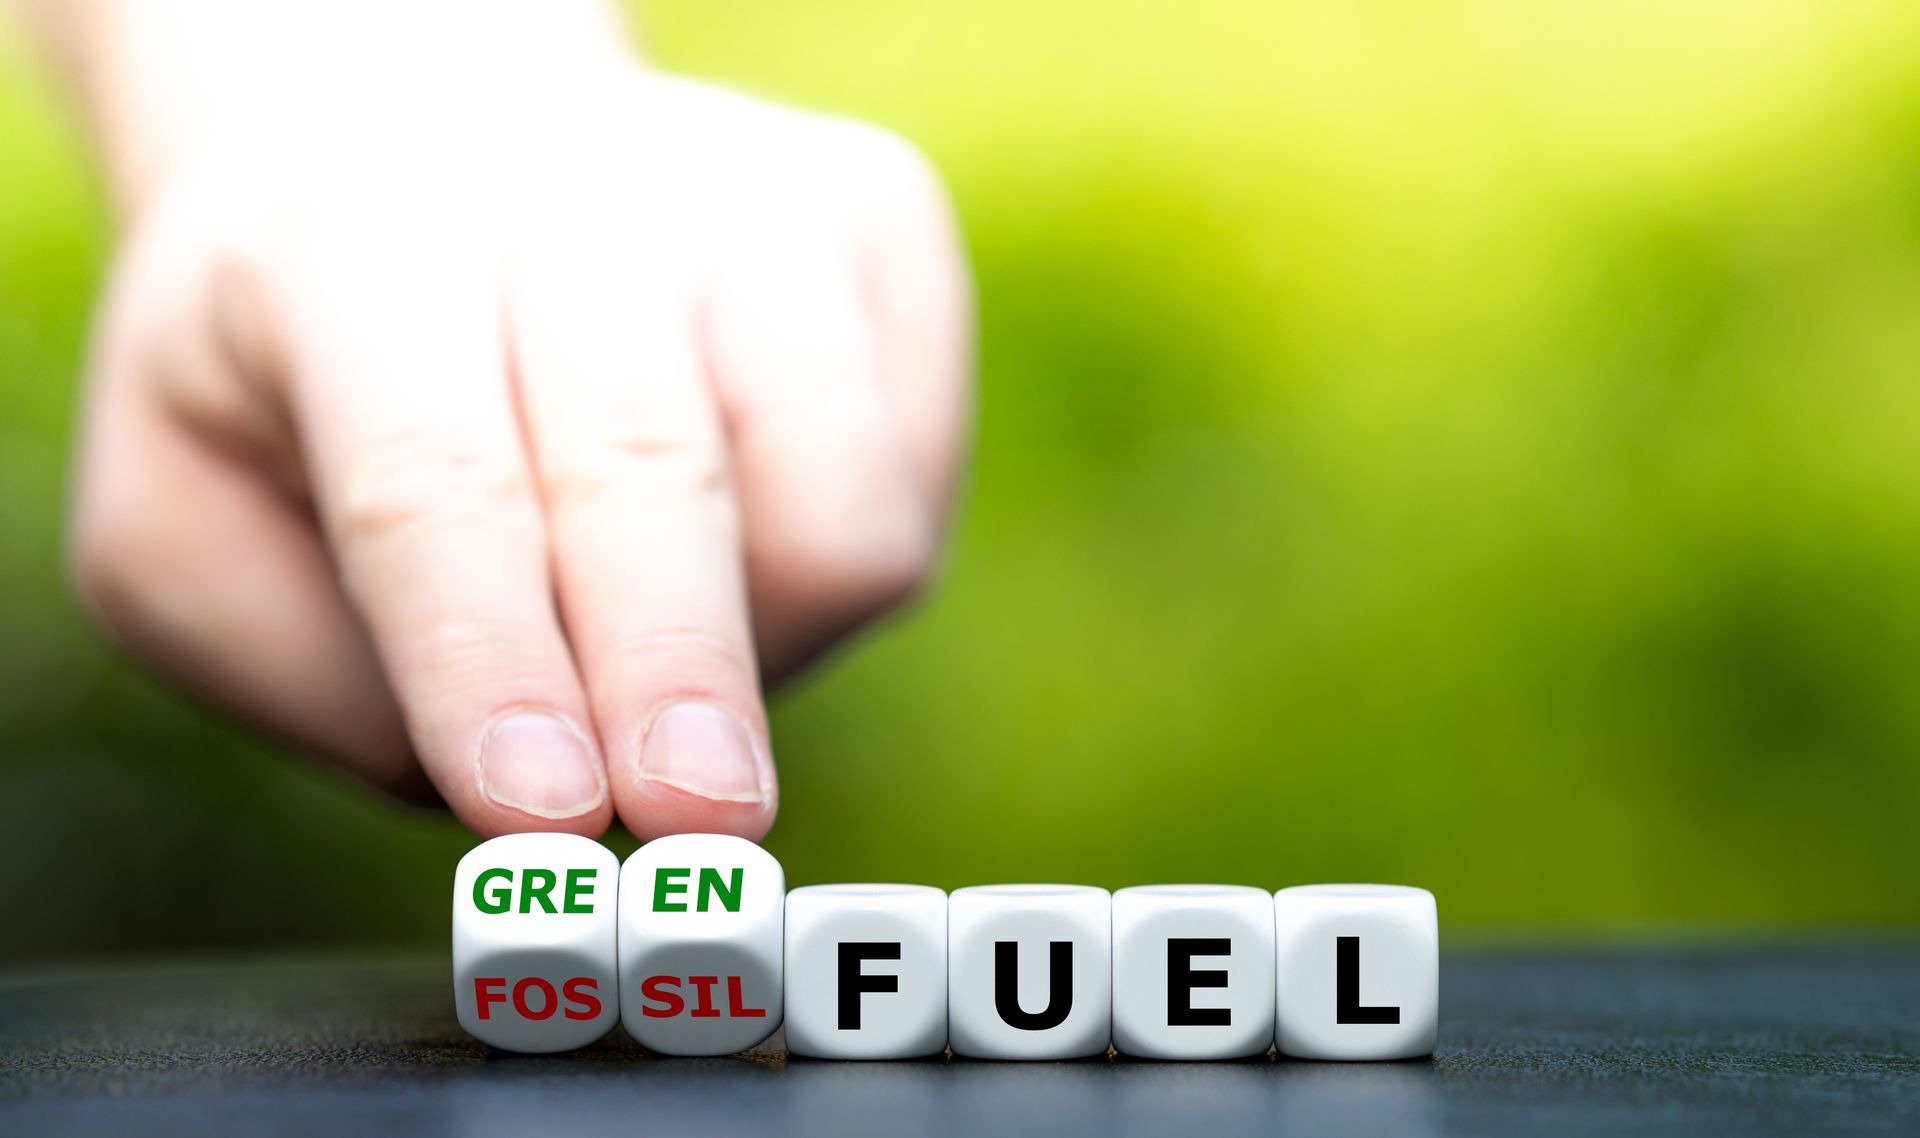 hand touching dices with the word green and the word fossil next to dices forming the word fuel.